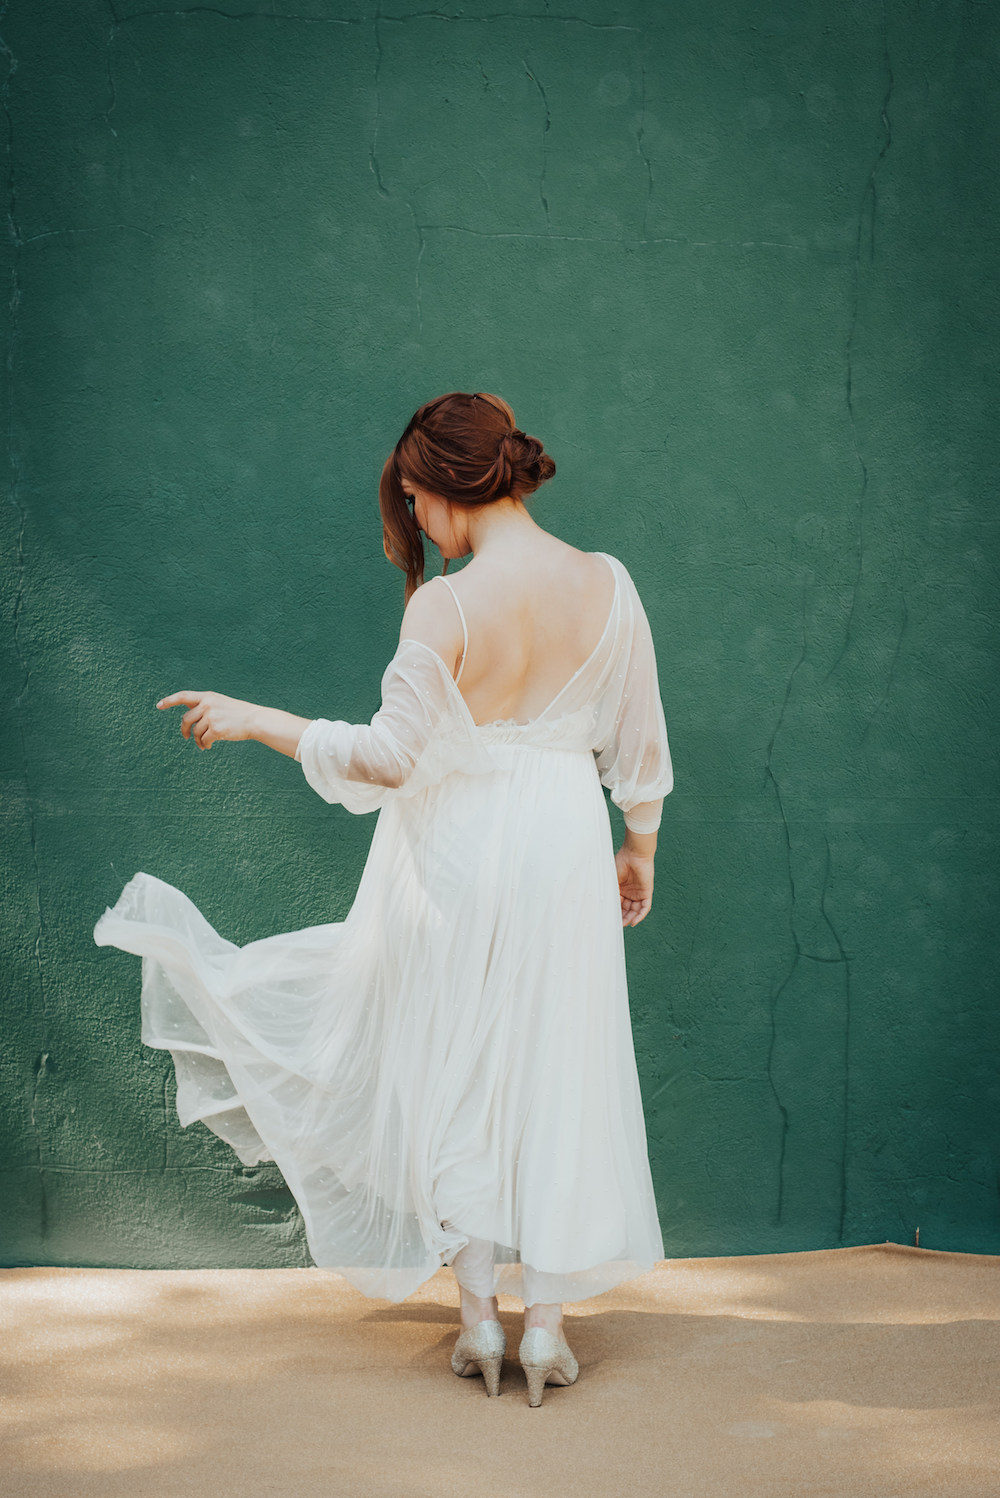 Robes de mariée L’Amoureuse by Ingrid Fey - "Welcome to Amourwood" - Blog Mariage Madame C